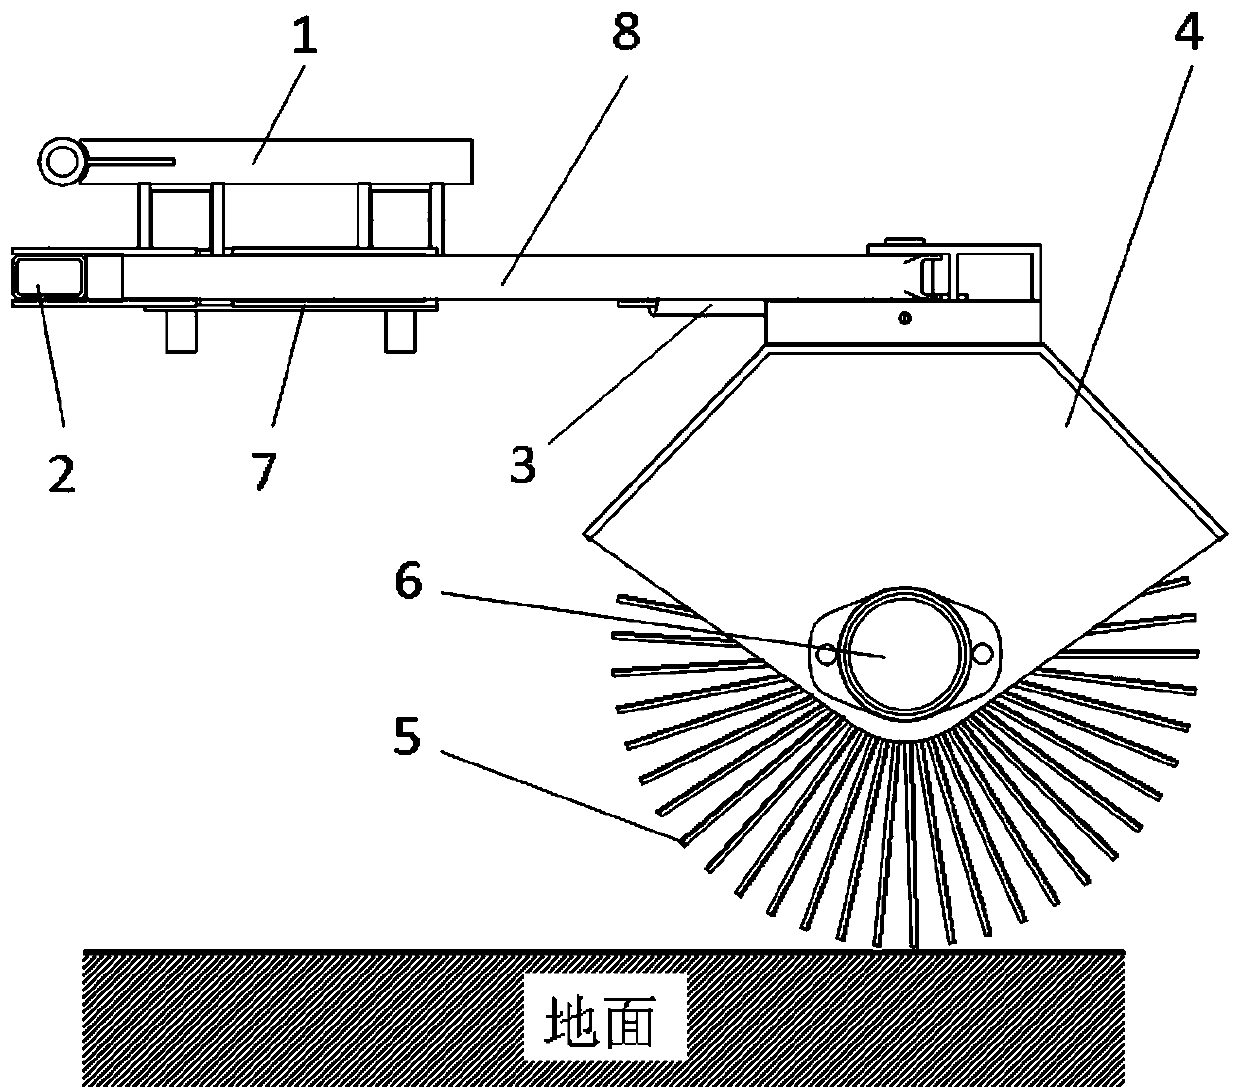 Intermediately-arranged rolling sweeping mechanism used for road sweeper